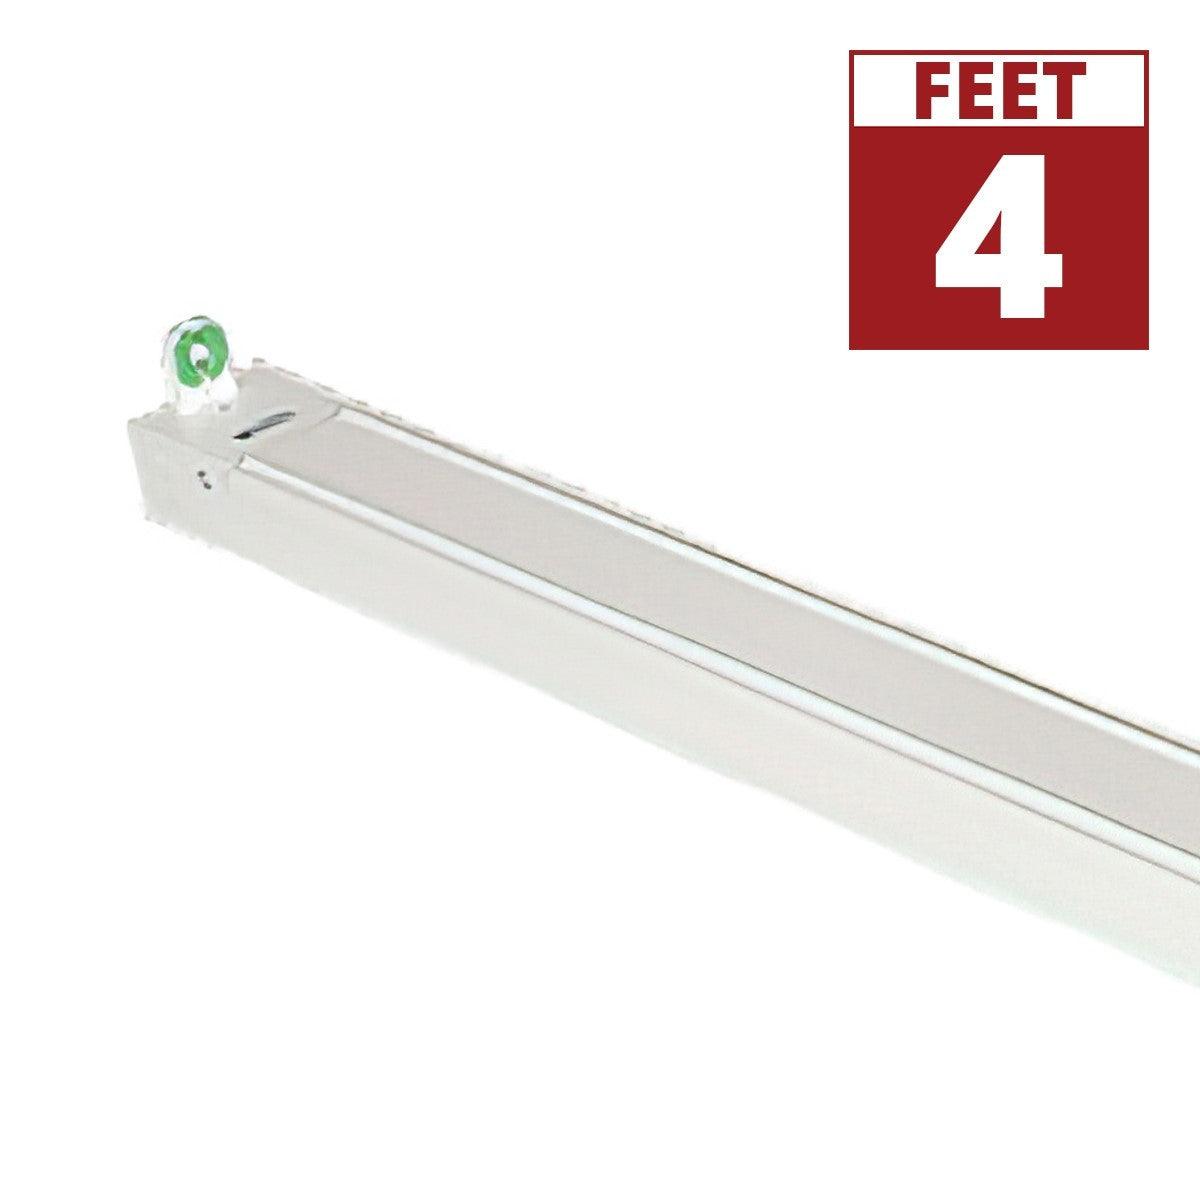 4ft LED Ready Strip Light 1-lamp Double End Wiring LED T8 Bulbs Not Included - Bees Lighting